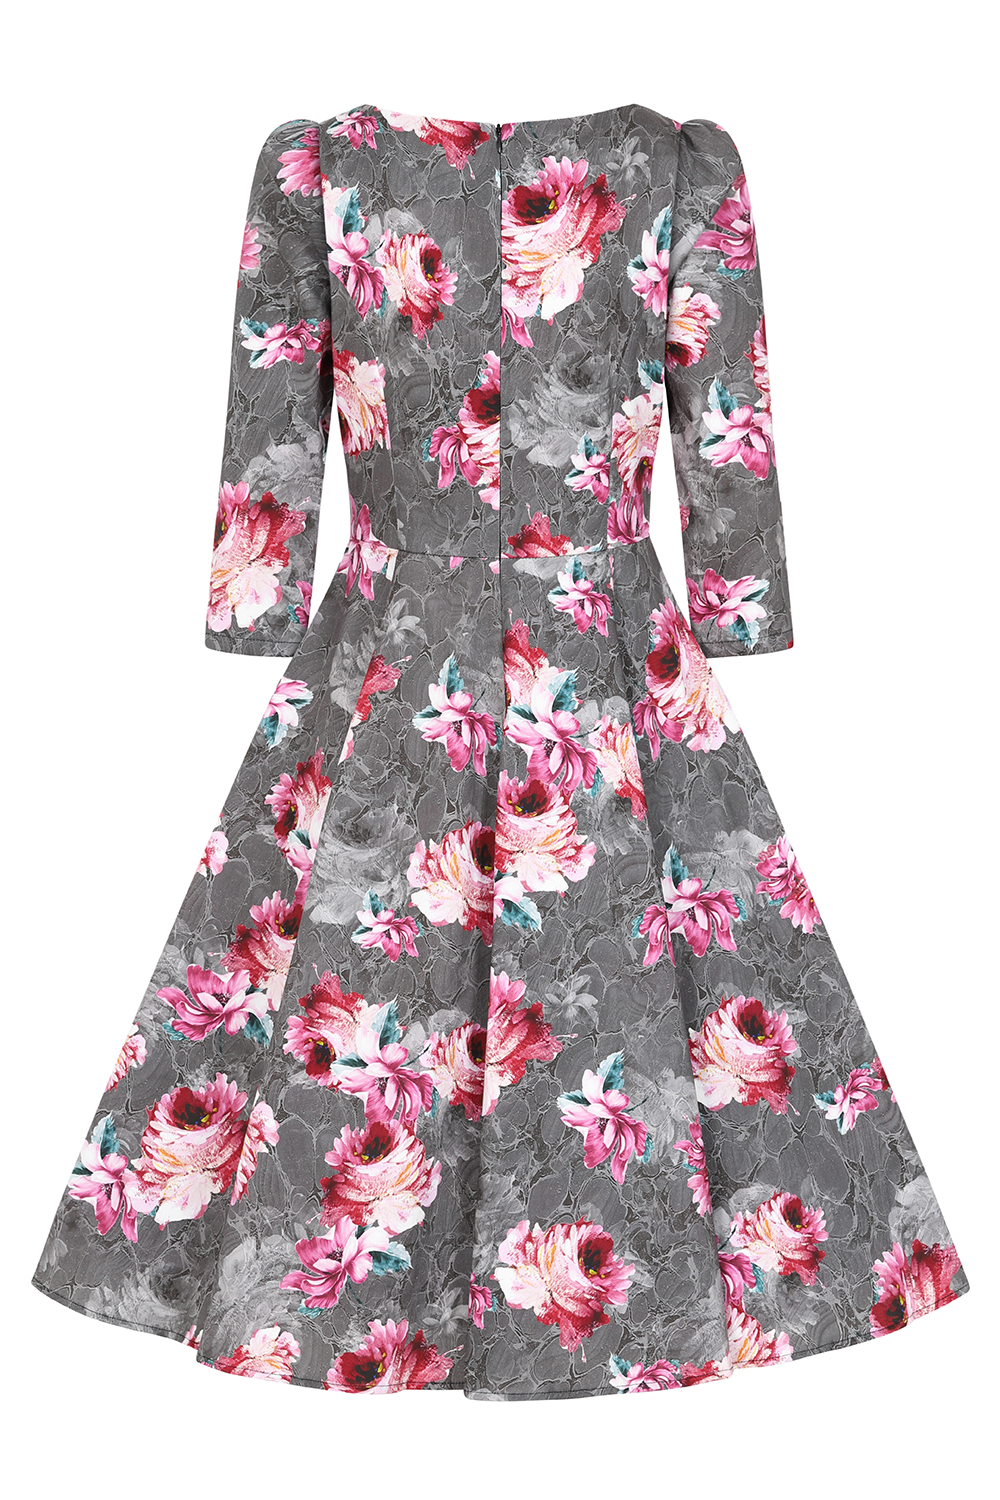 Harriet Floral Swing Dress in Extended Sizing